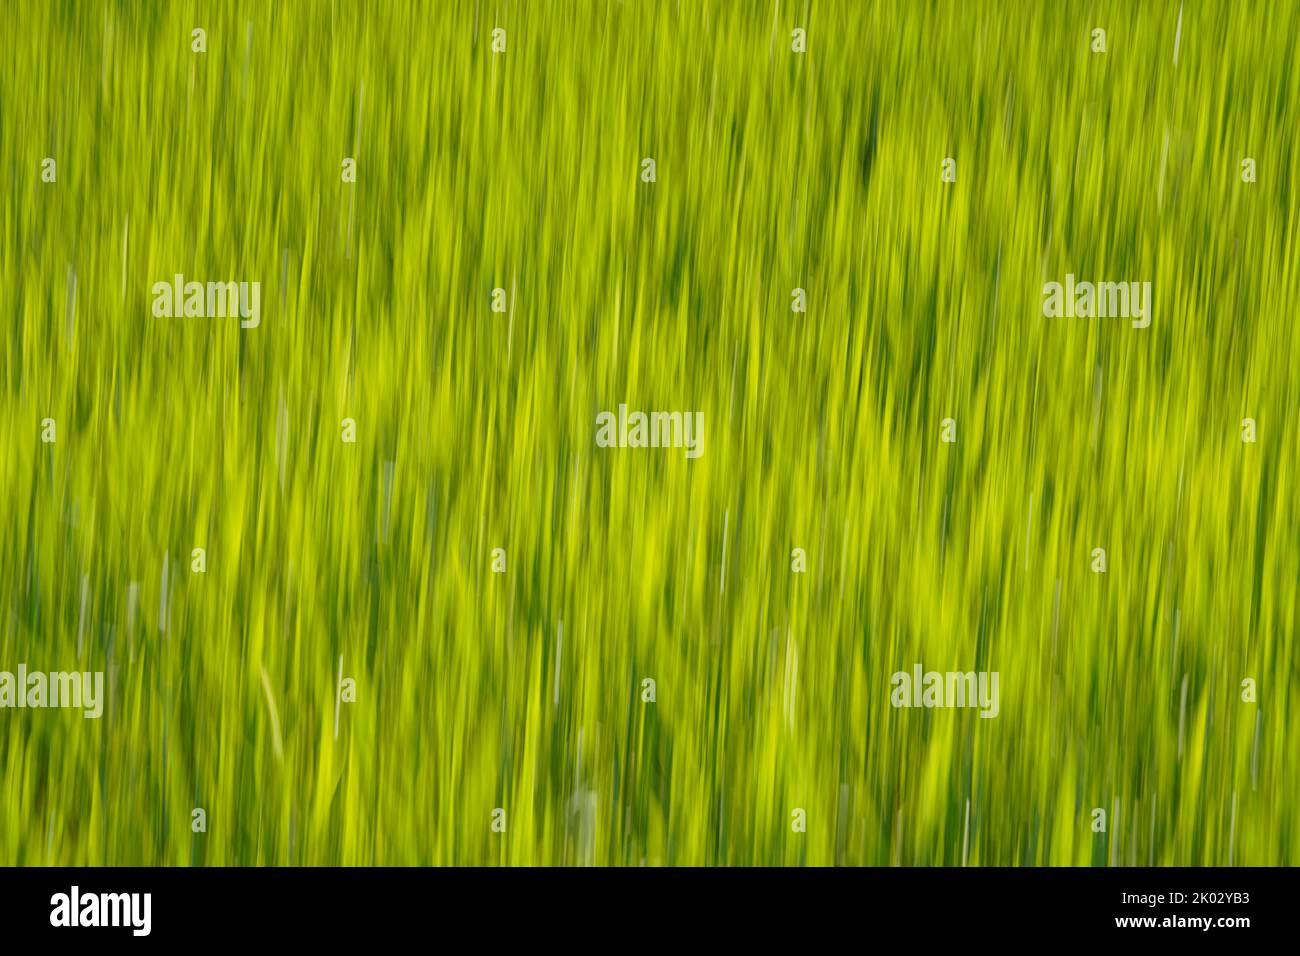 Germany, Bavaria, Upper Bavaria, Altötting district, meadow, grass, abstract, wipe shot, detail Stock Photo